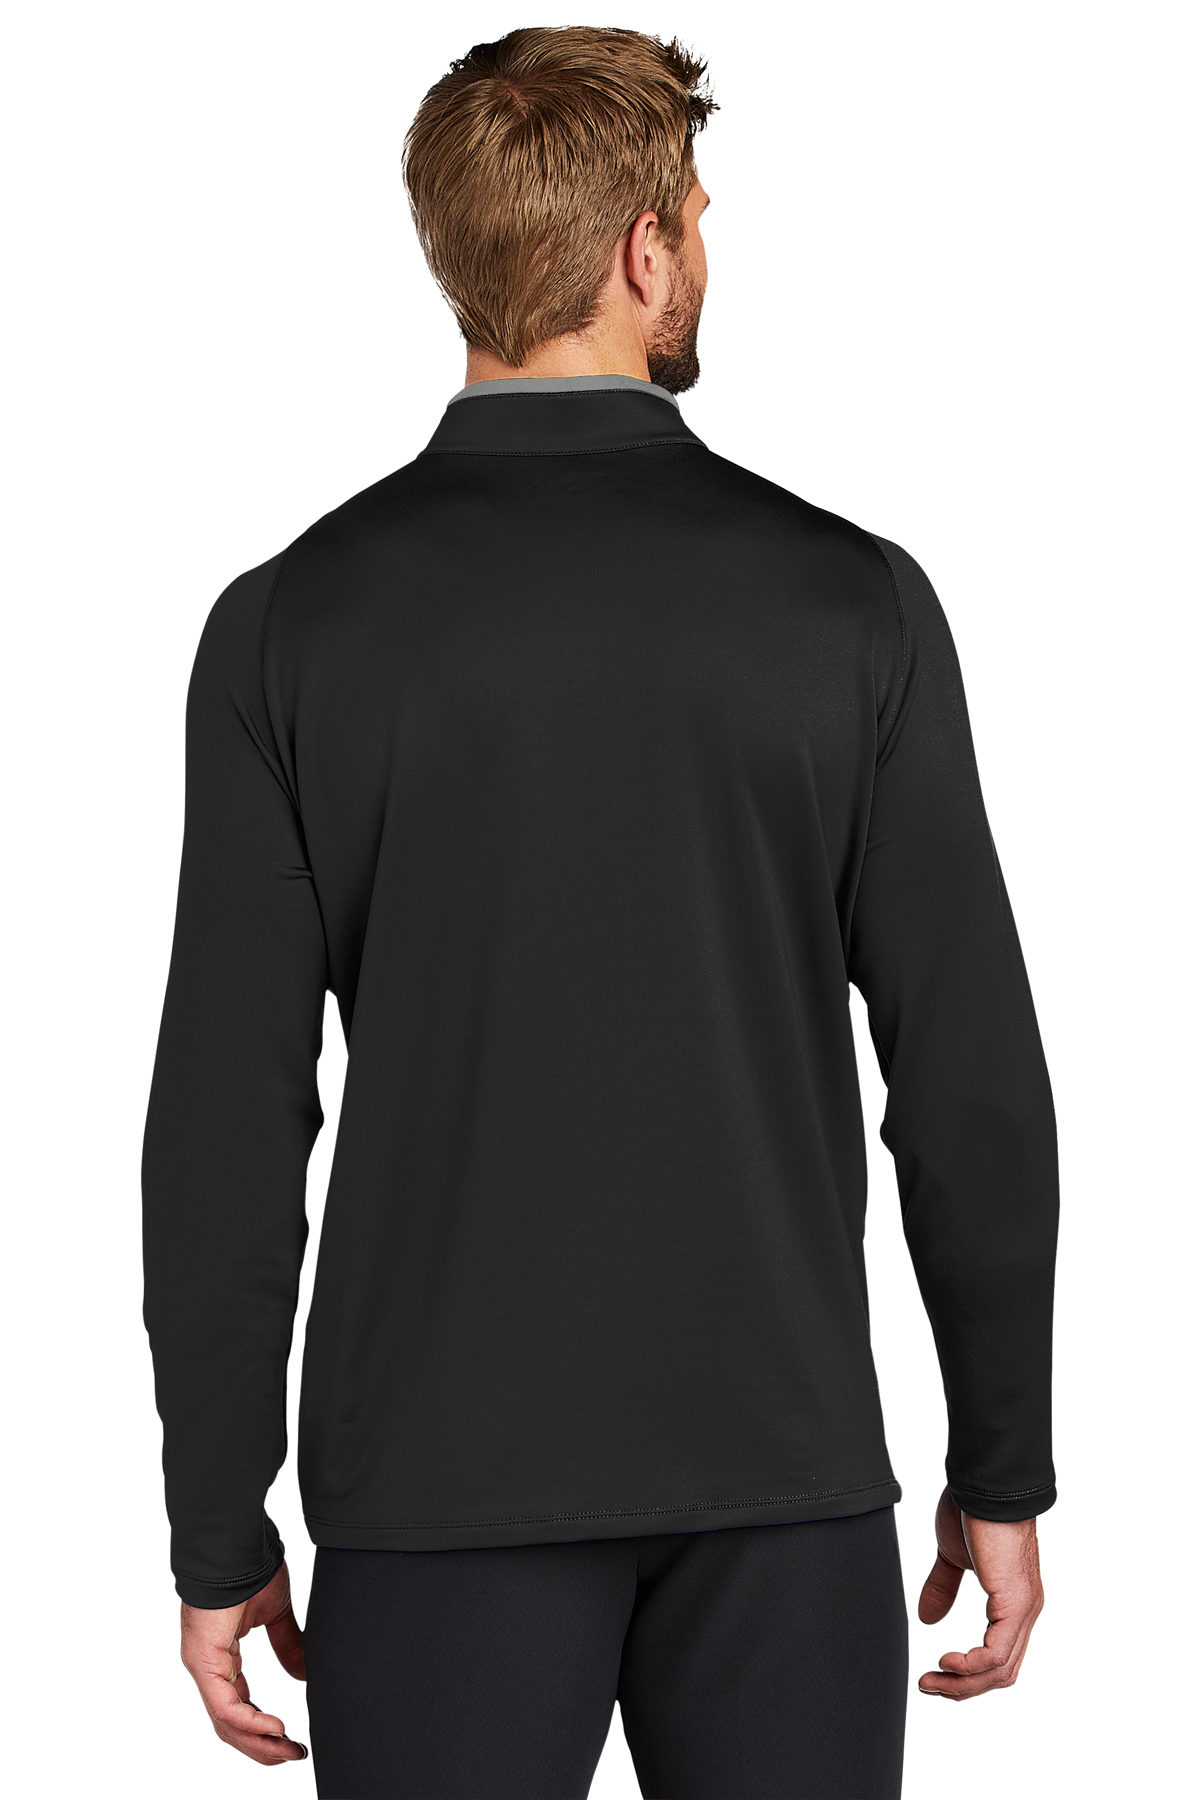 Nike Dri-FIT Stretch 1/2-Zip Cover-Up | Product | SanMar